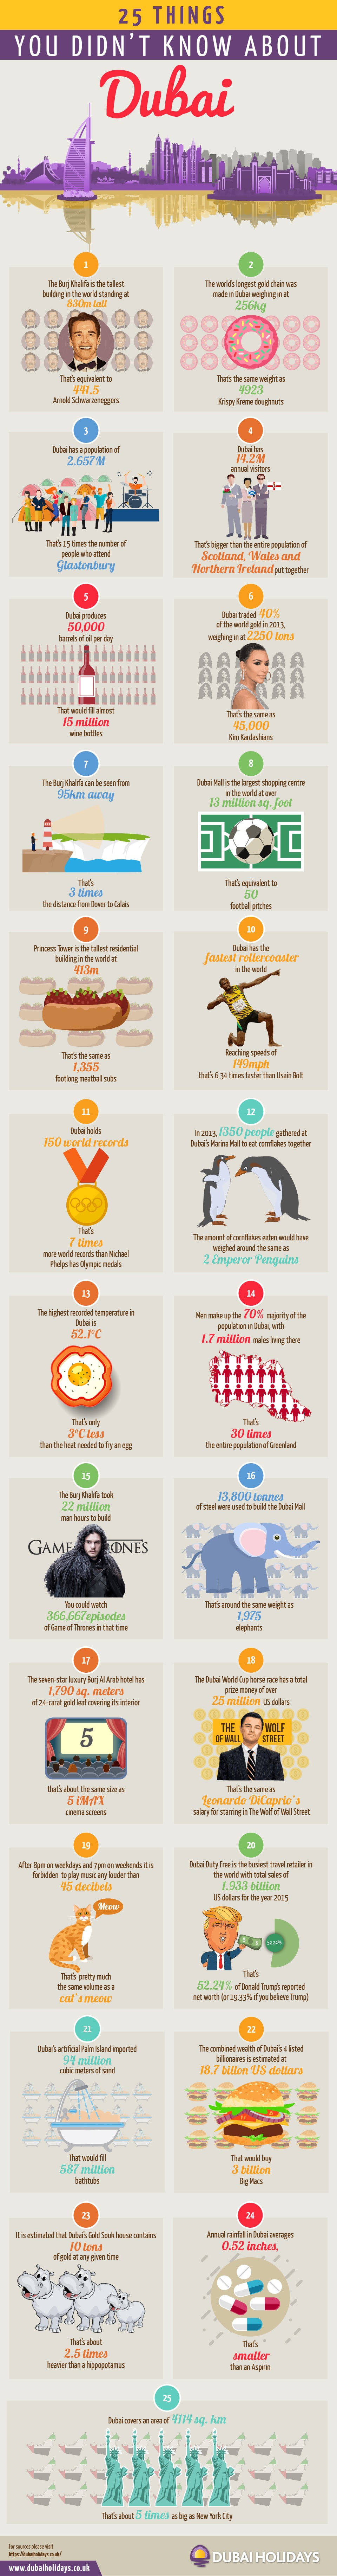 25 Things You Probably Didn’t Know About Dubai [Infographic]